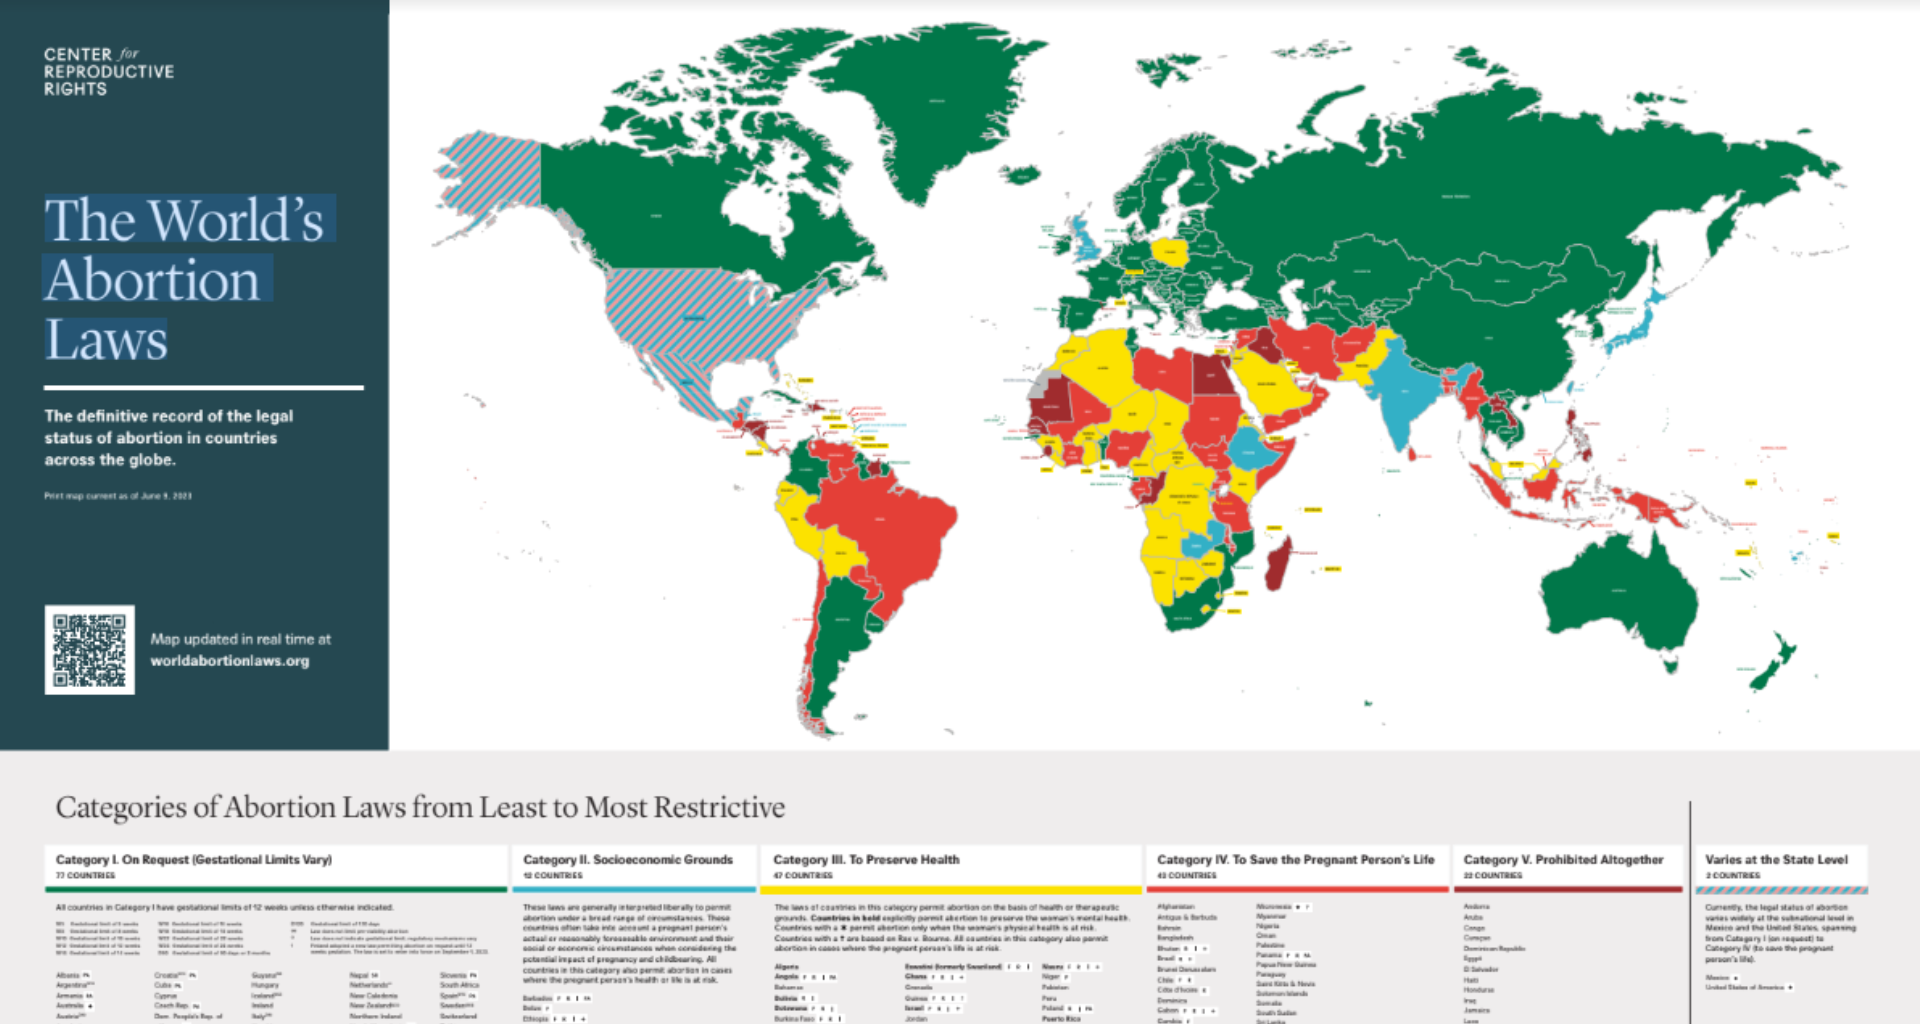 The World’s Abortion Laws